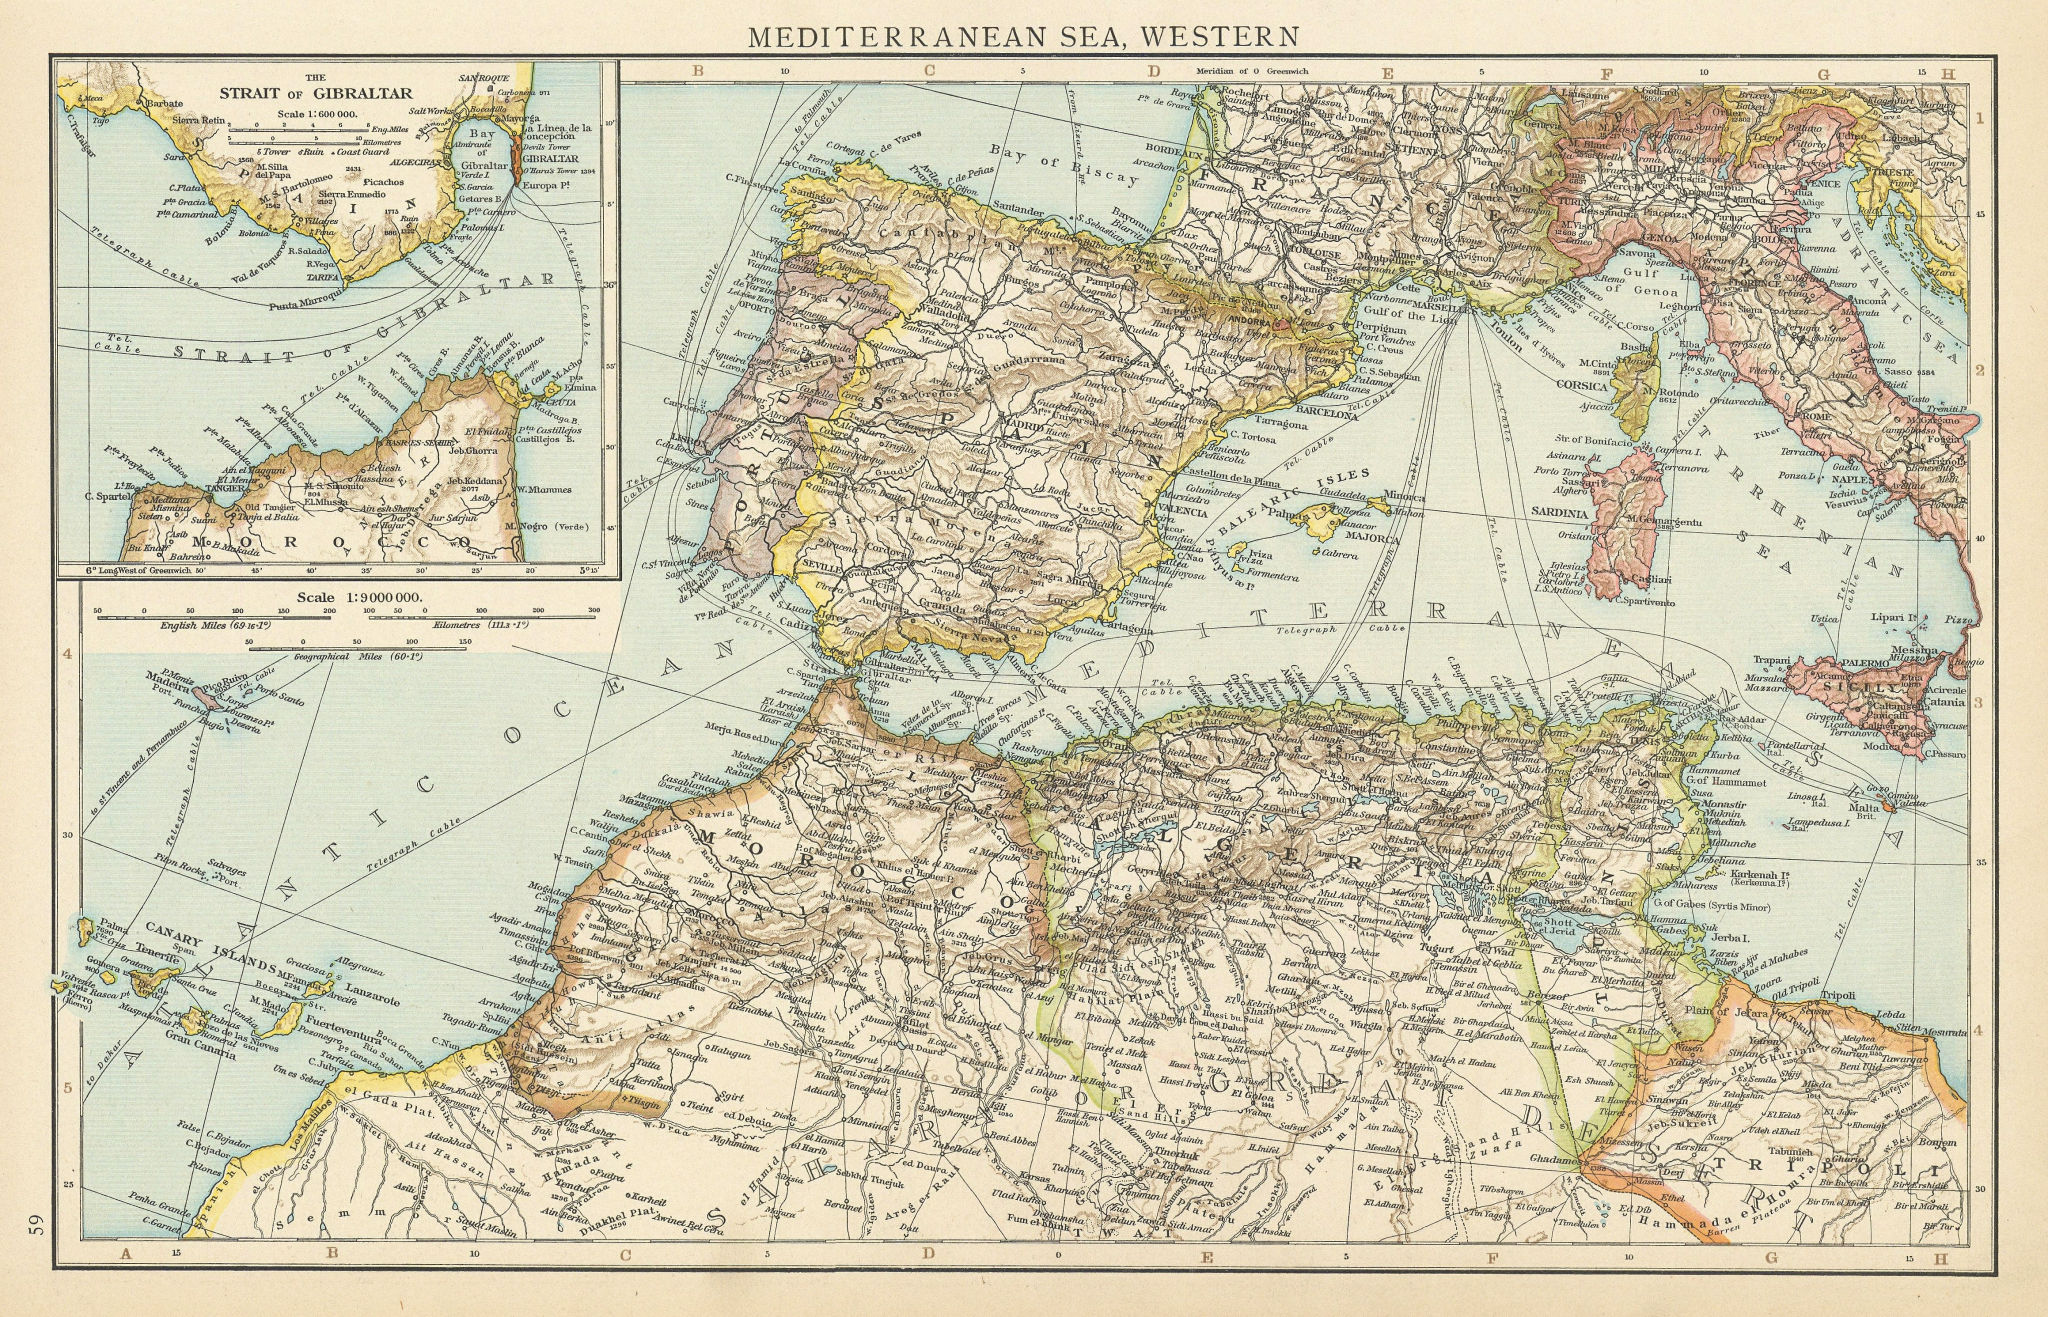 Associate Product Western Mediterranean sea. Strait of Gibraltar. Telegraph cables. TIMES 1895 map